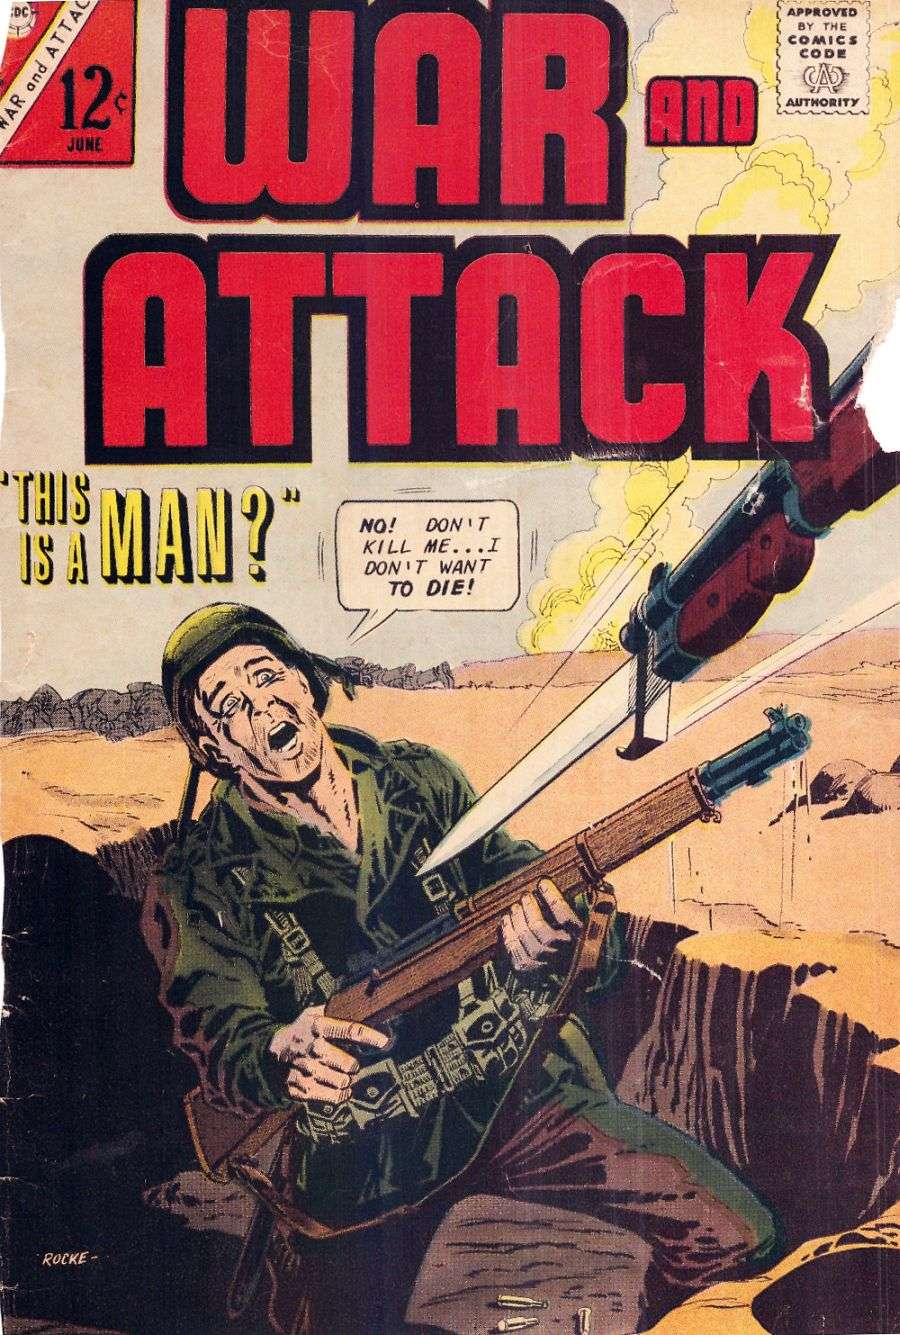 Book Cover For War and Attack 60